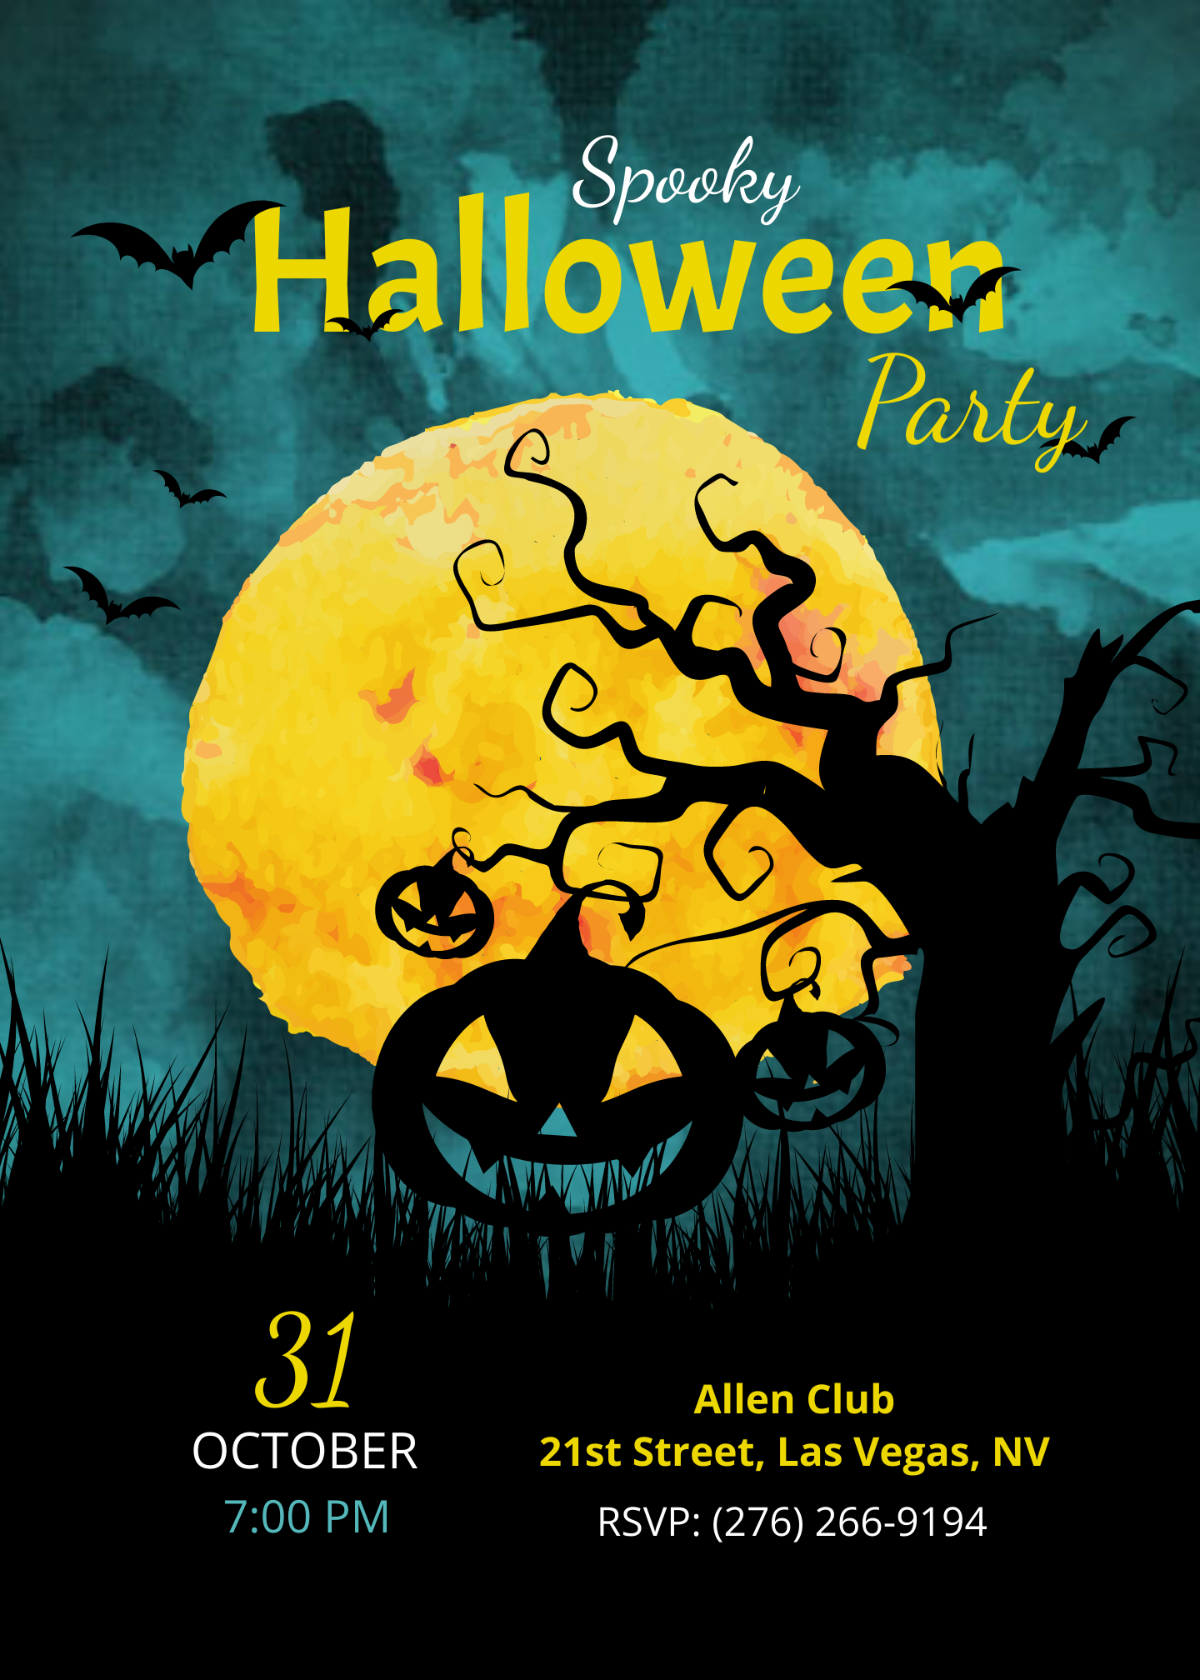 Spooky Halloween Party Invitation Template